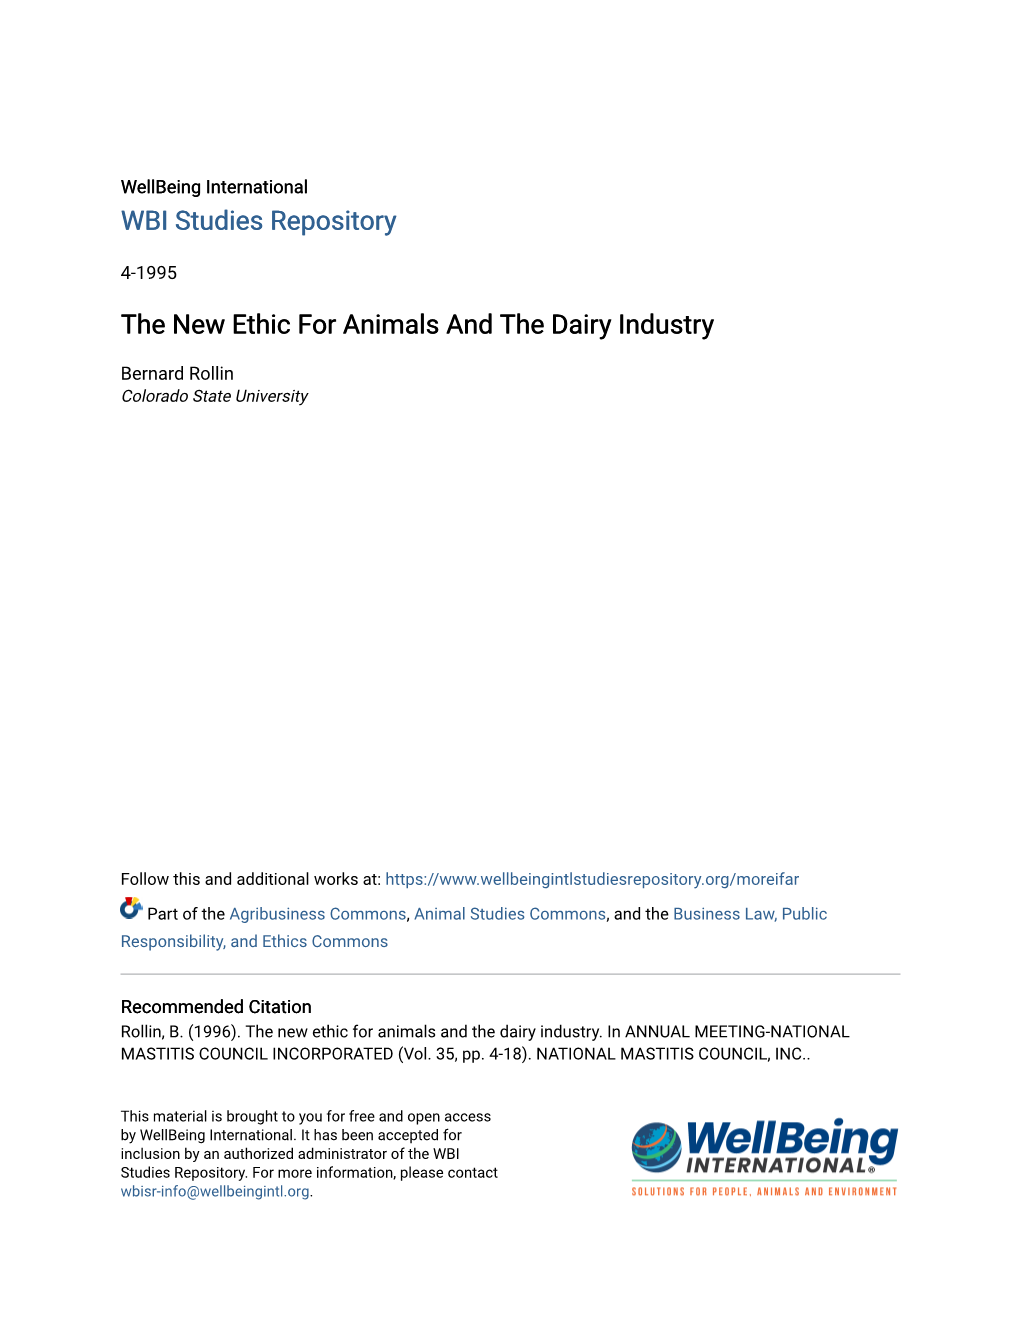 The New Ethic for Animals and the Dairy Industry